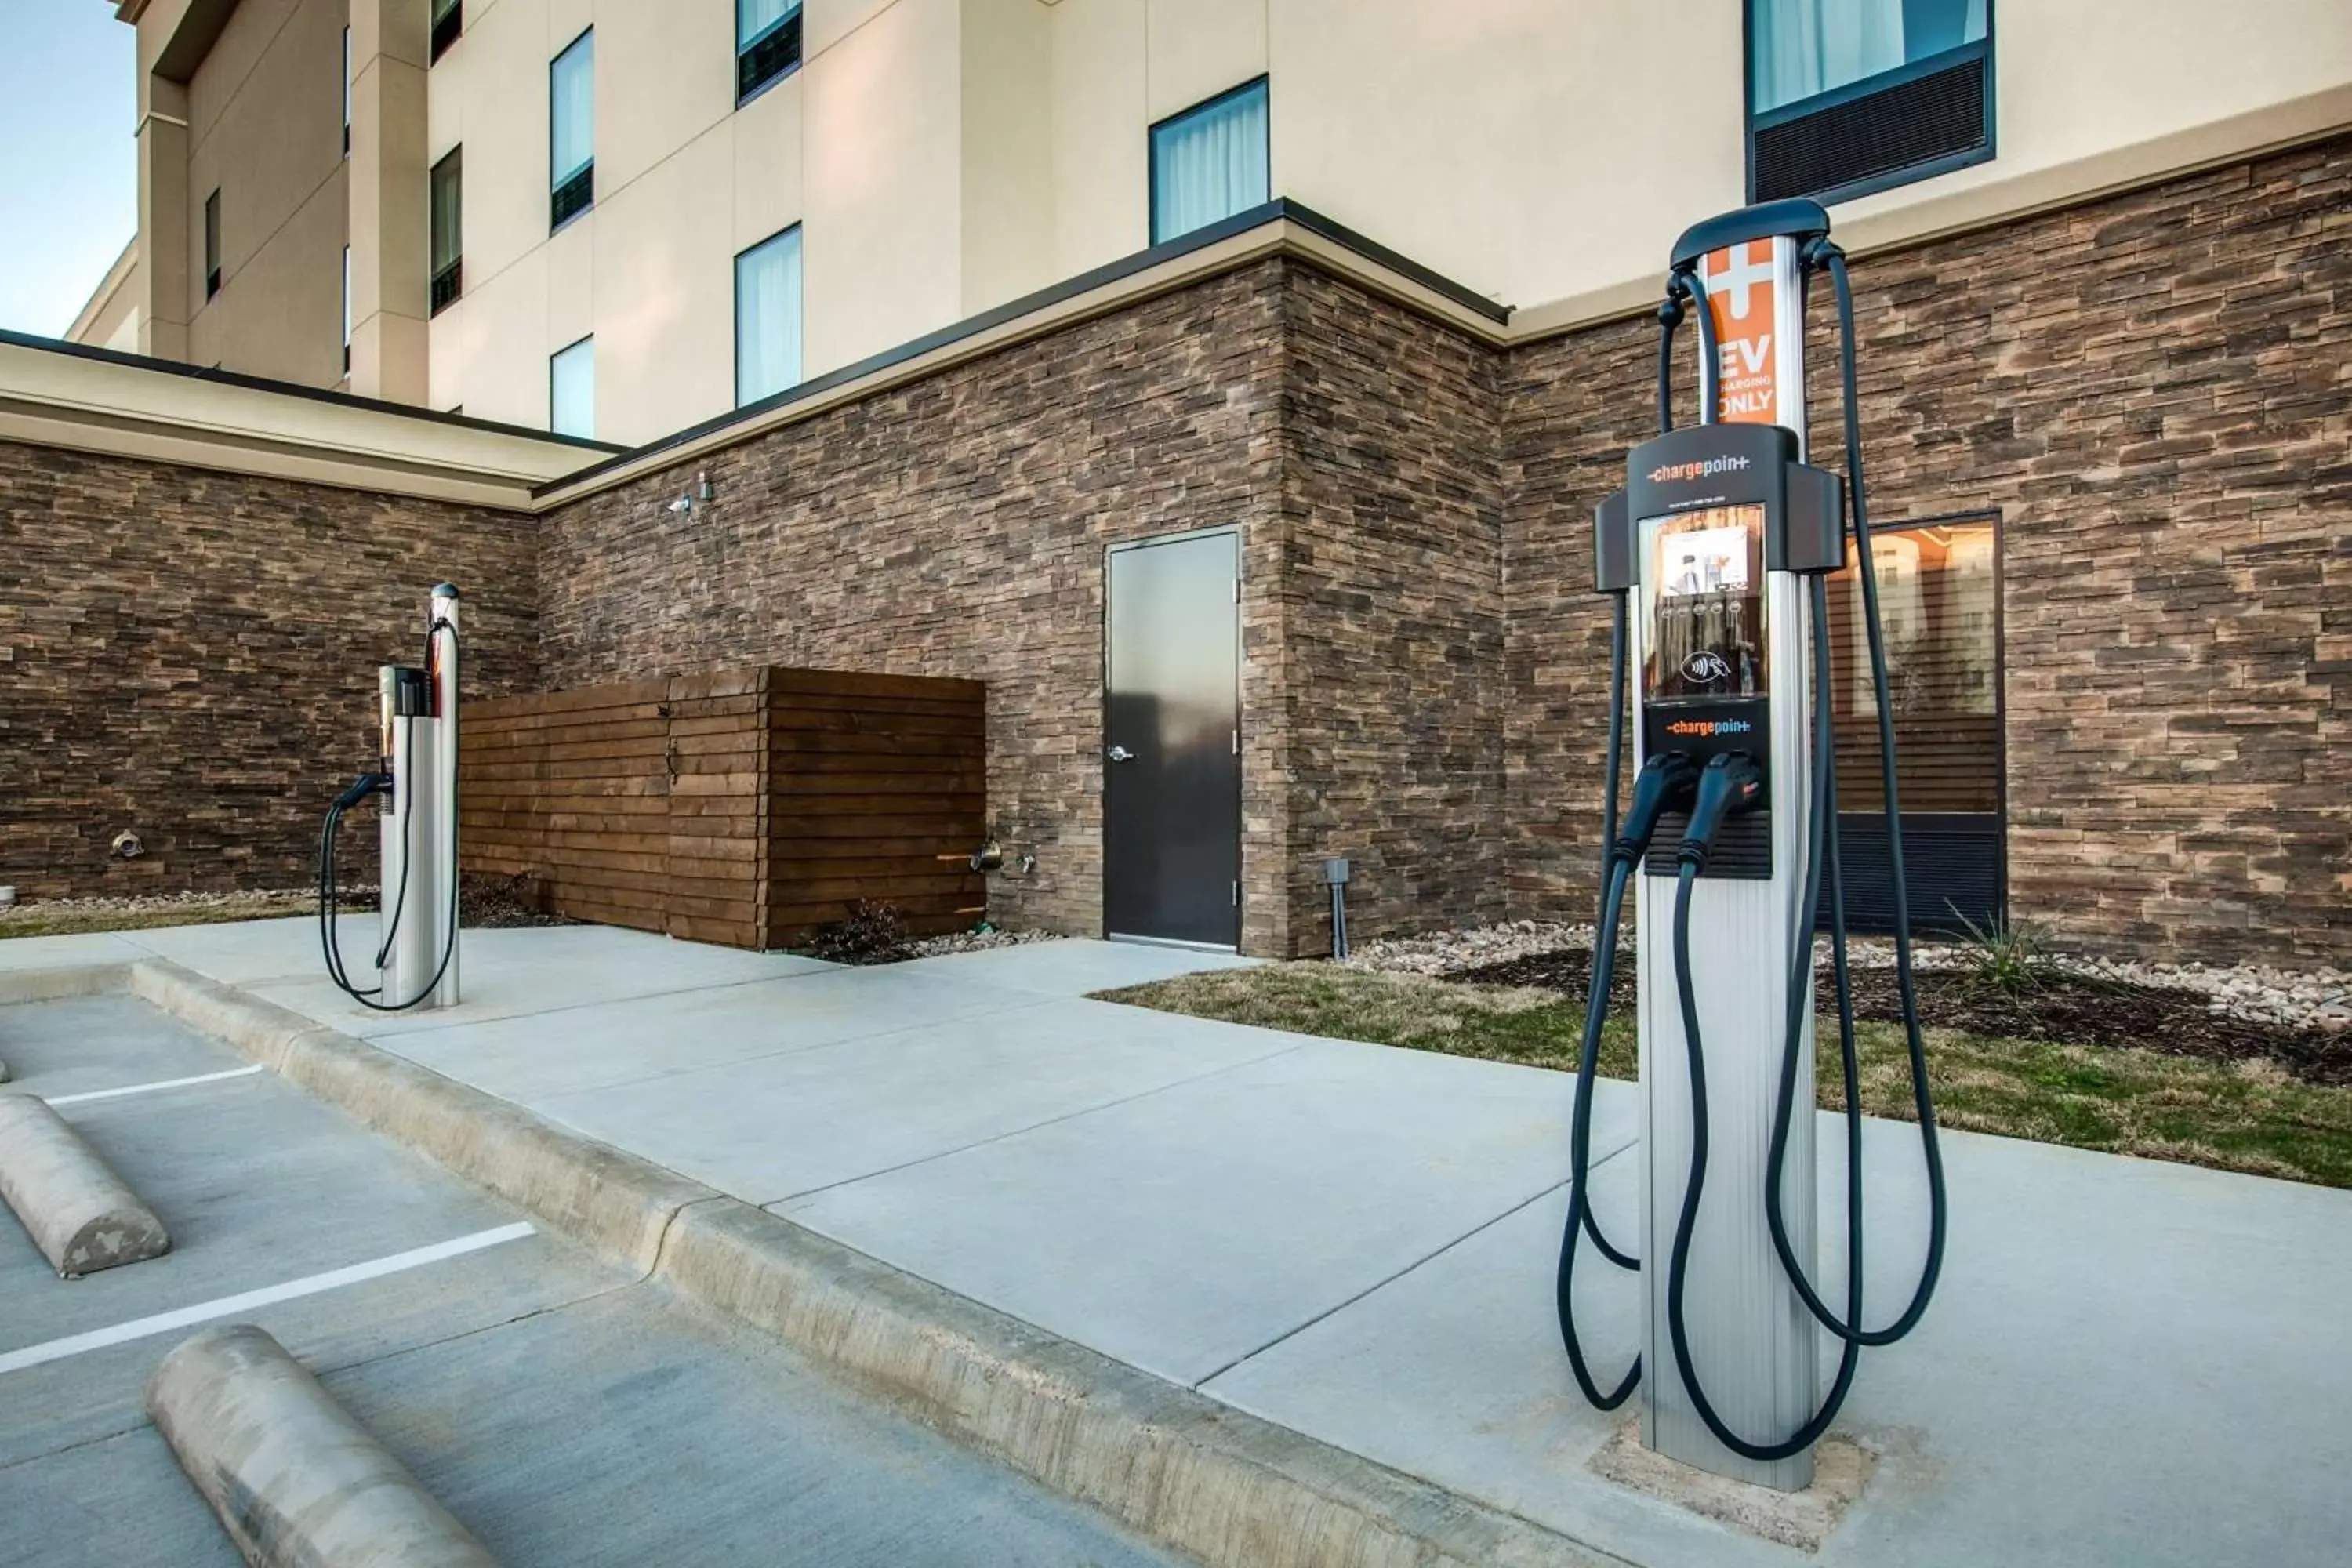 Business facilities in Hampton Inn & Suites Dallas/Ft. Worth Airport South